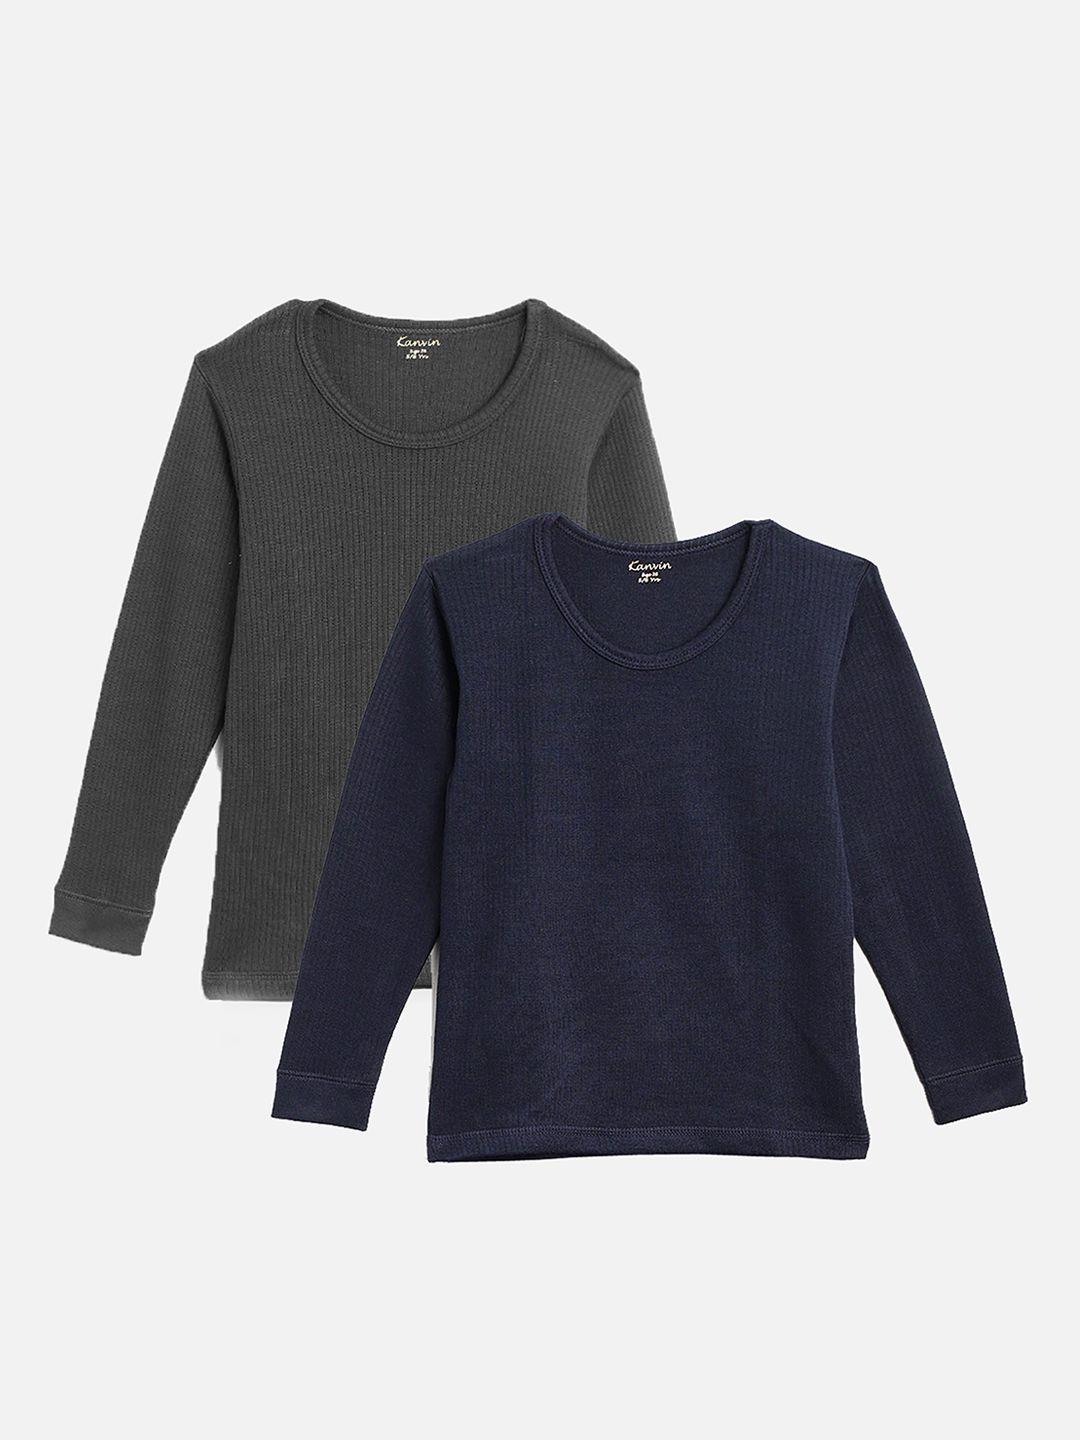 kanvin boys charcoal grey and navy blue pack of 2 solid thermal tops